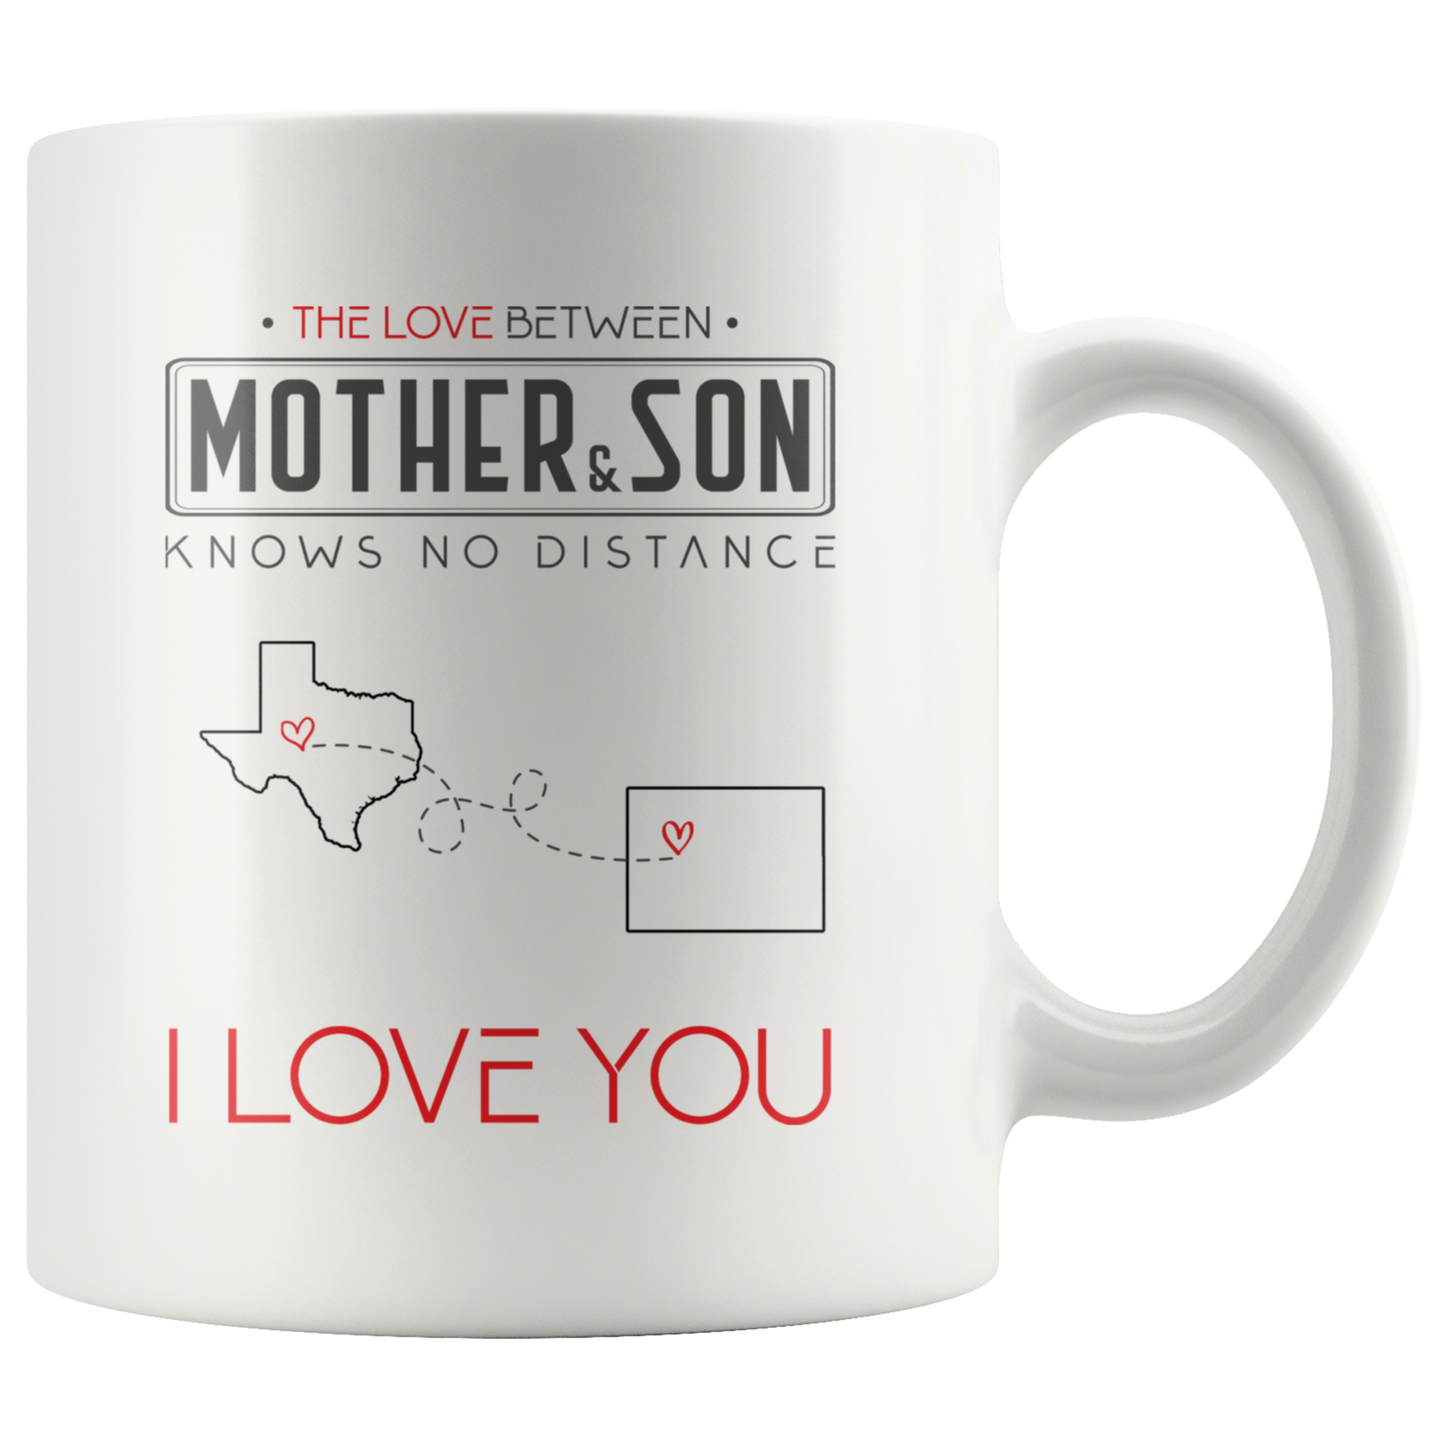 ND-21315402-sp-26136 - [ Texas | Colorado ] (CC_Accent_Mug_) Mom And Son Accent Mug 11 oz  - The Love Between Mother A